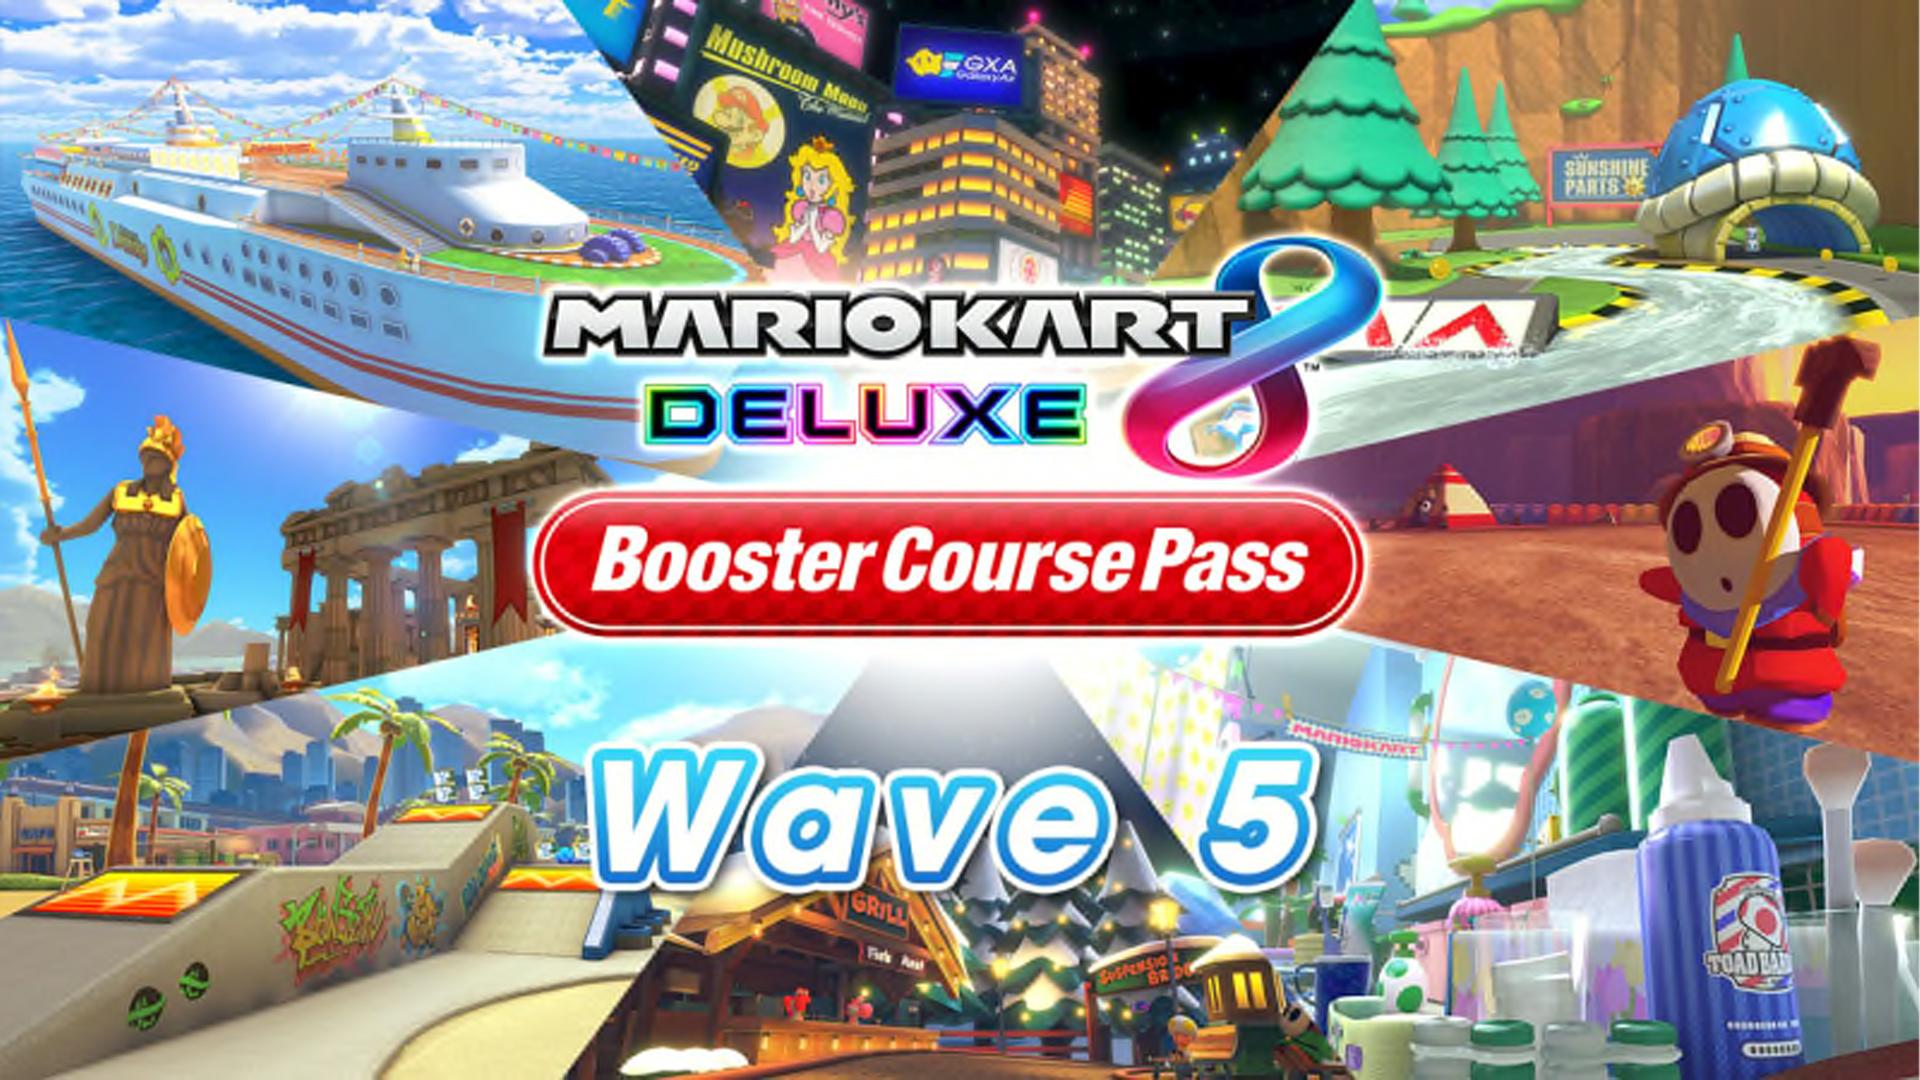 Mario Kart 8 Deluxe Booster Course Pass Series 5 content revealed, releases  12th July